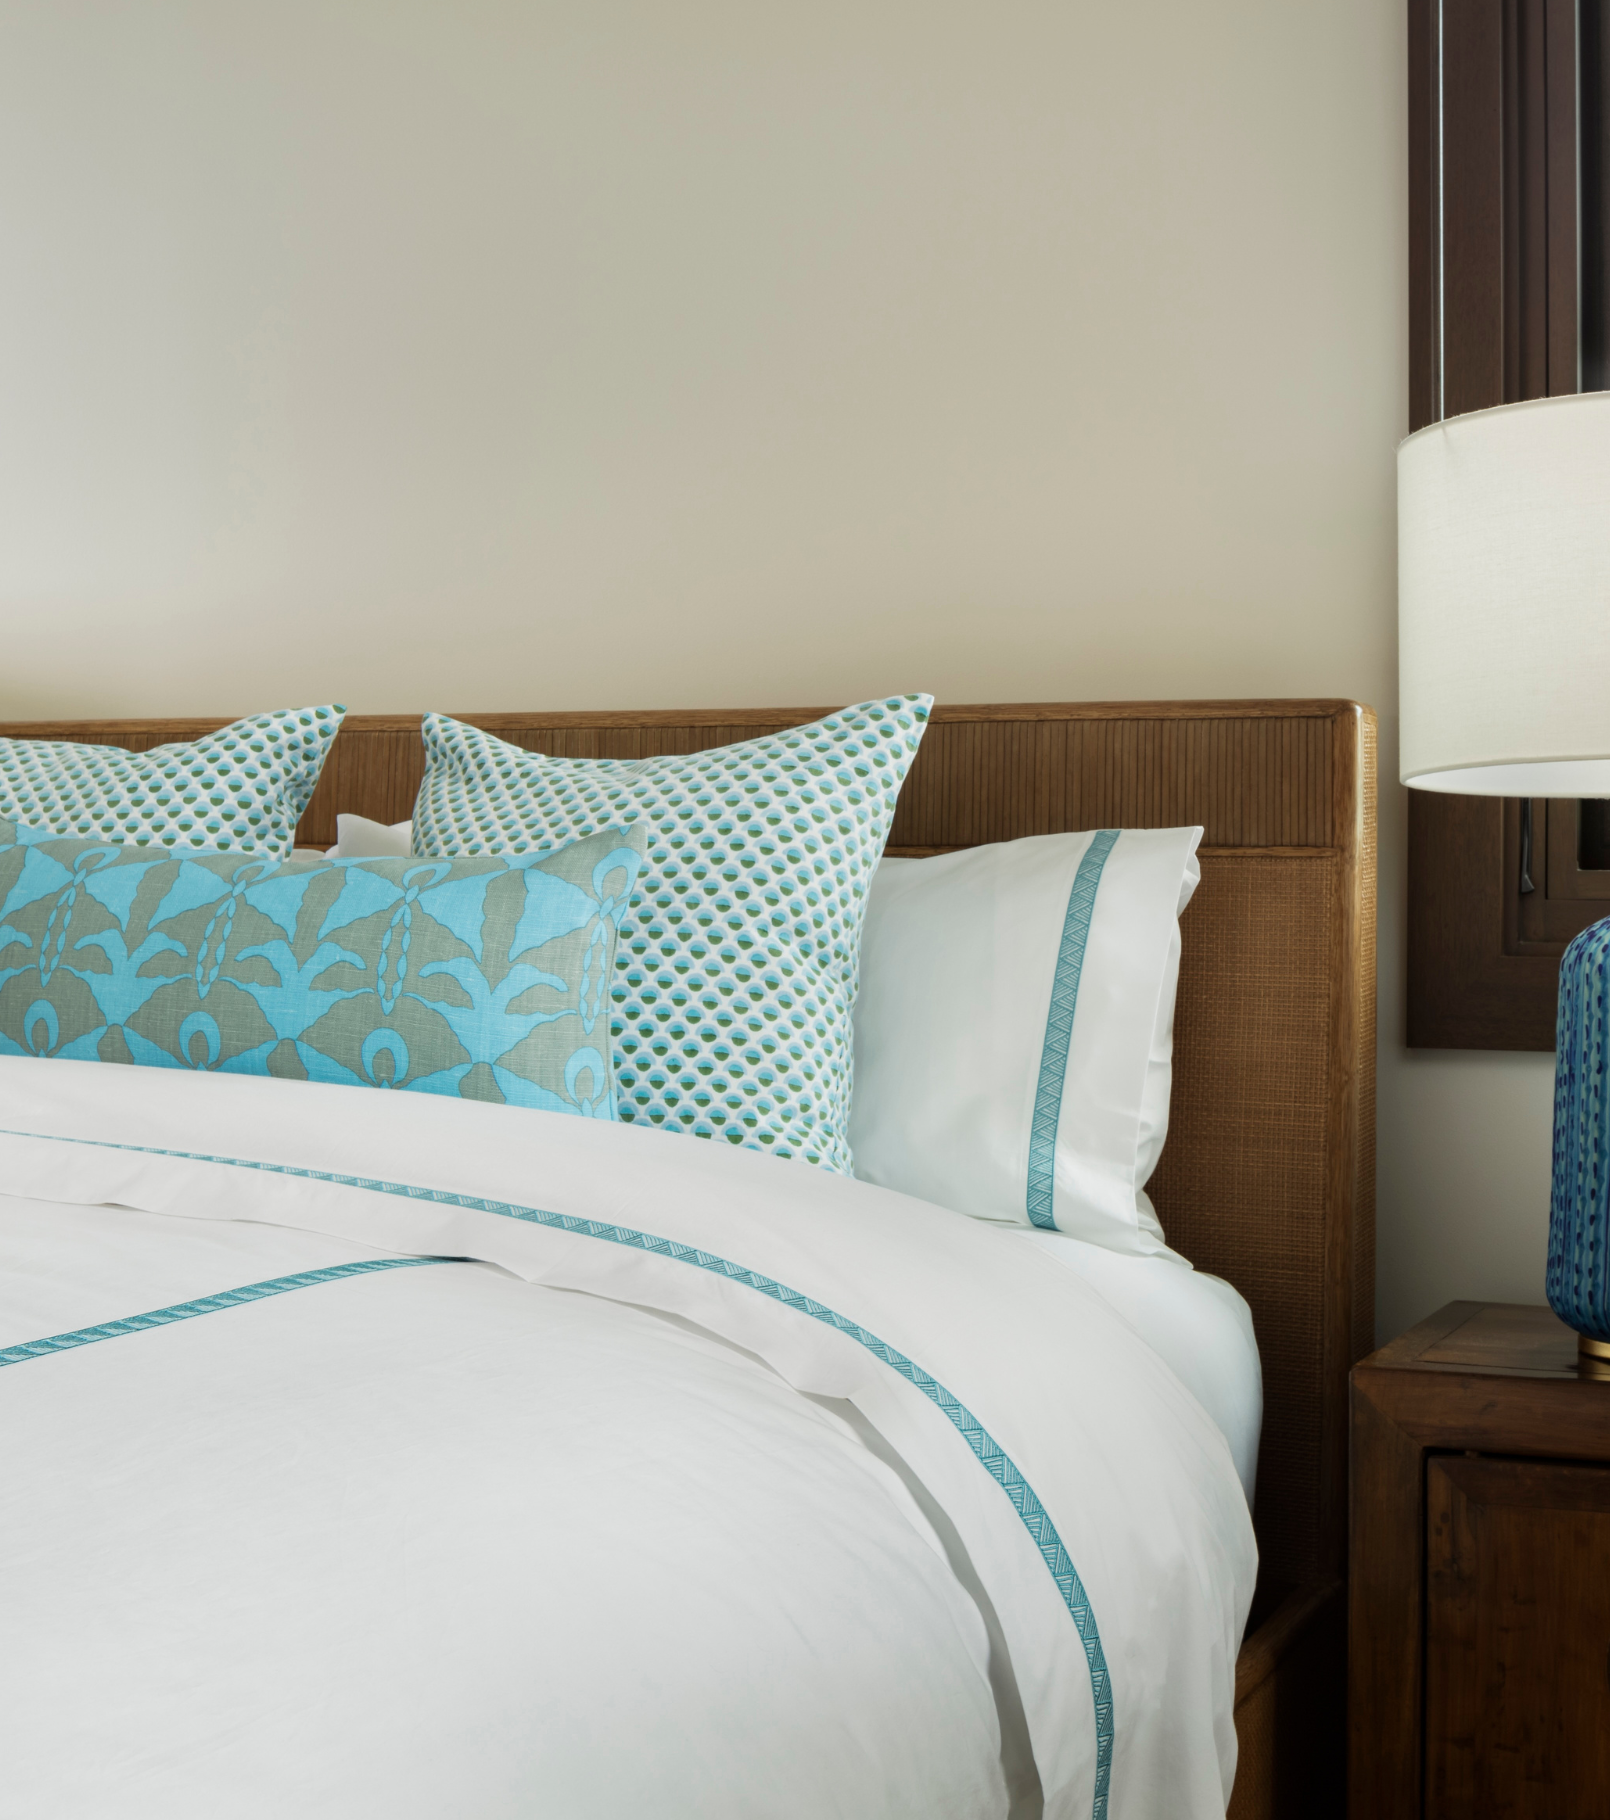 Averylily Weave Duvet Cover in White with embroidered trim in Sky Blue. 510-thread count cotton percale. Styled with Serena Dugan Studio decorative pillows.